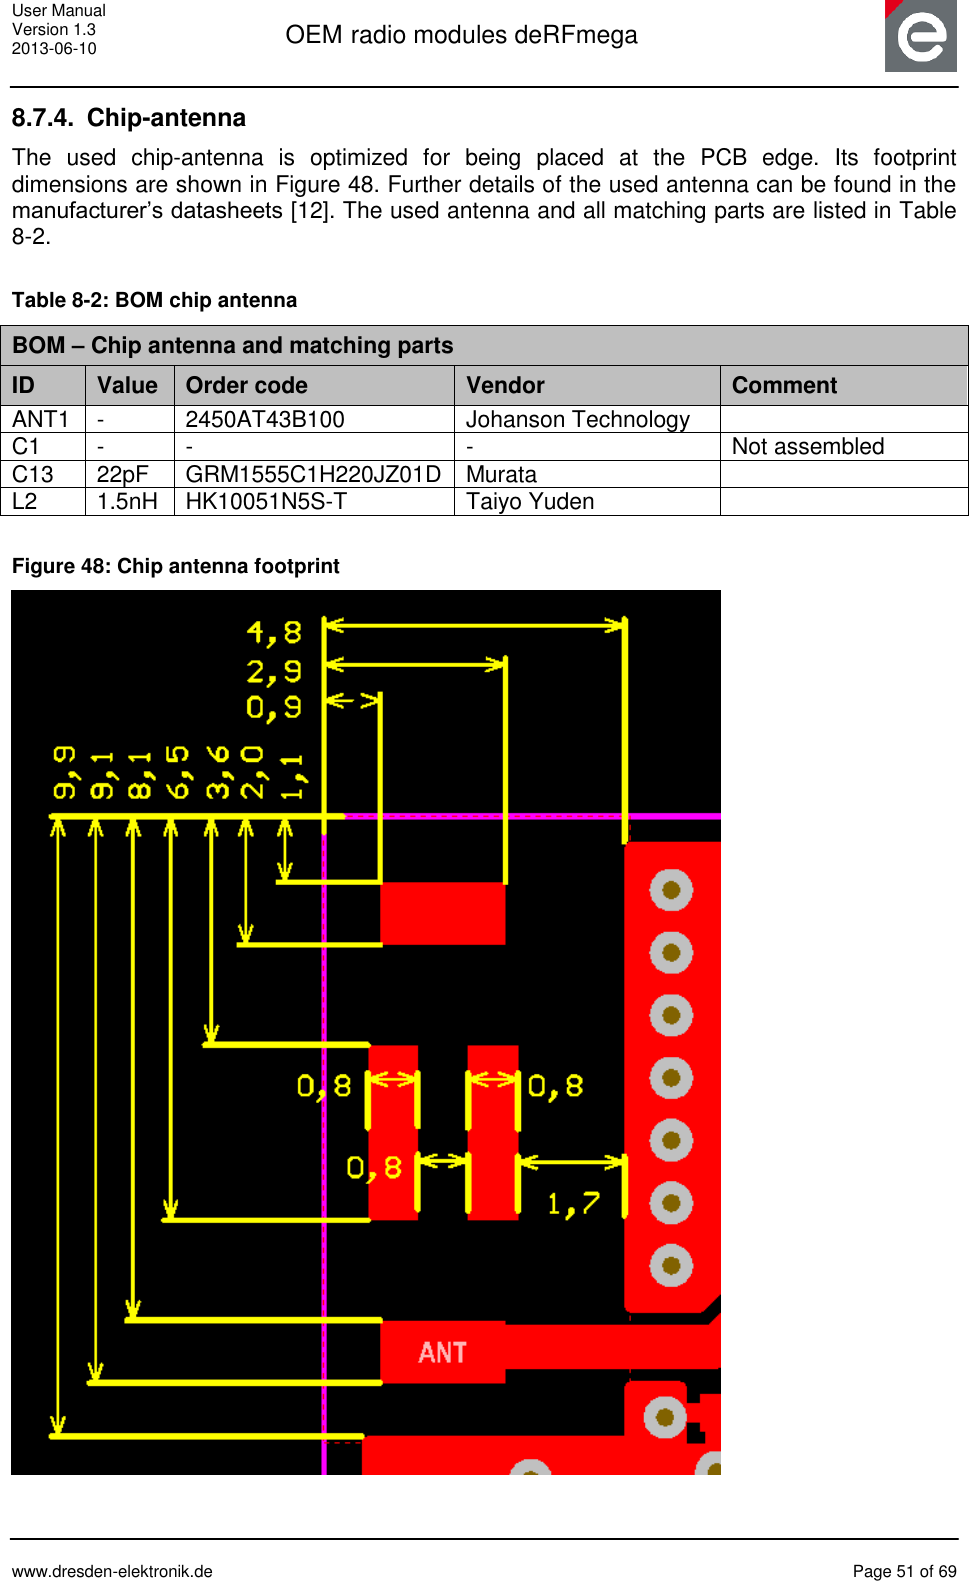 User Manual Version 1.3 2013-06-10  OEM radio modules deRFmega      www.dresden-elektronik.de  Page 51 of 69  8.7.4.  Chip-antenna The  used  chip-antenna  is  optimized  for  being  placed  at  the  PCB  edge.  Its  footprint dimensions are shown in Figure 48. Further details of the used antenna can be found in the manufacturer’s datasheets [12]. The used antenna and all matching parts are listed in Table 8-2.  Table 8-2: BOM chip antenna BOM – Chip antenna and matching parts ID Value Order code Vendor Comment ANT1 - 2450AT43B100 Johanson Technology  C1 - - - Not assembled C13 22pF GRM1555C1H220JZ01D Murata  L2 1.5nH HK10051N5S-T Taiyo Yuden   Figure 48: Chip antenna footprint   